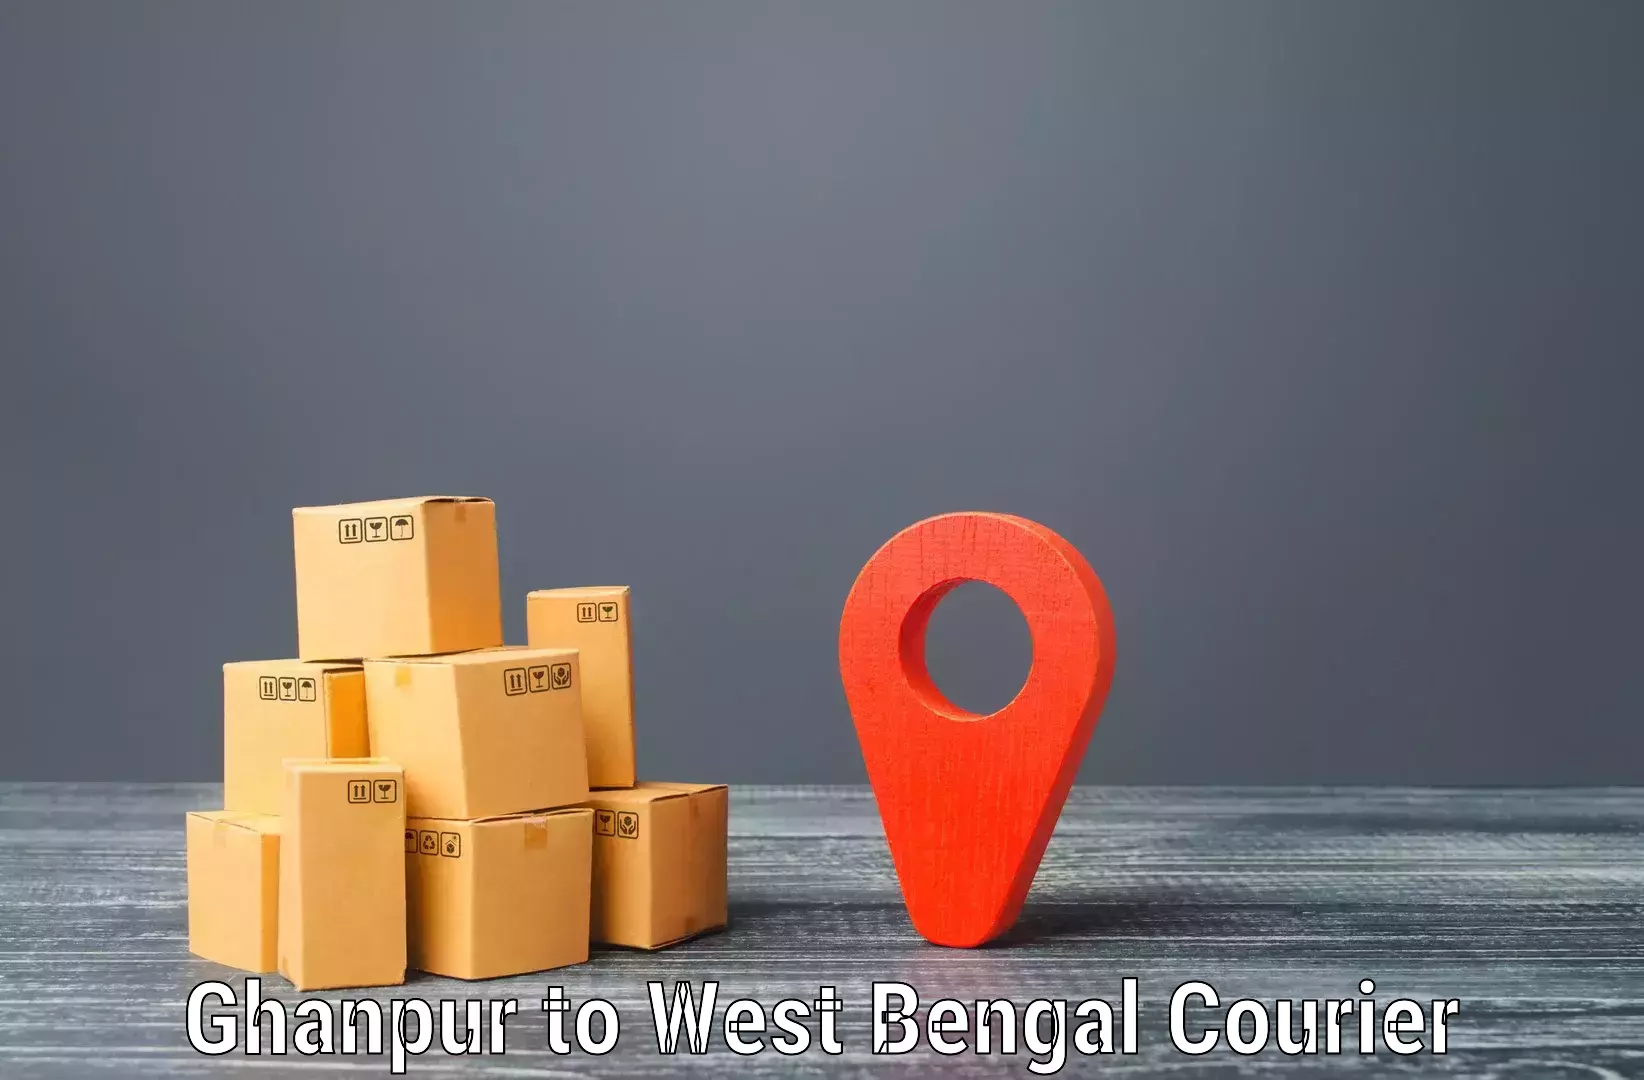 Cargo delivery service Ghanpur to Jhargram